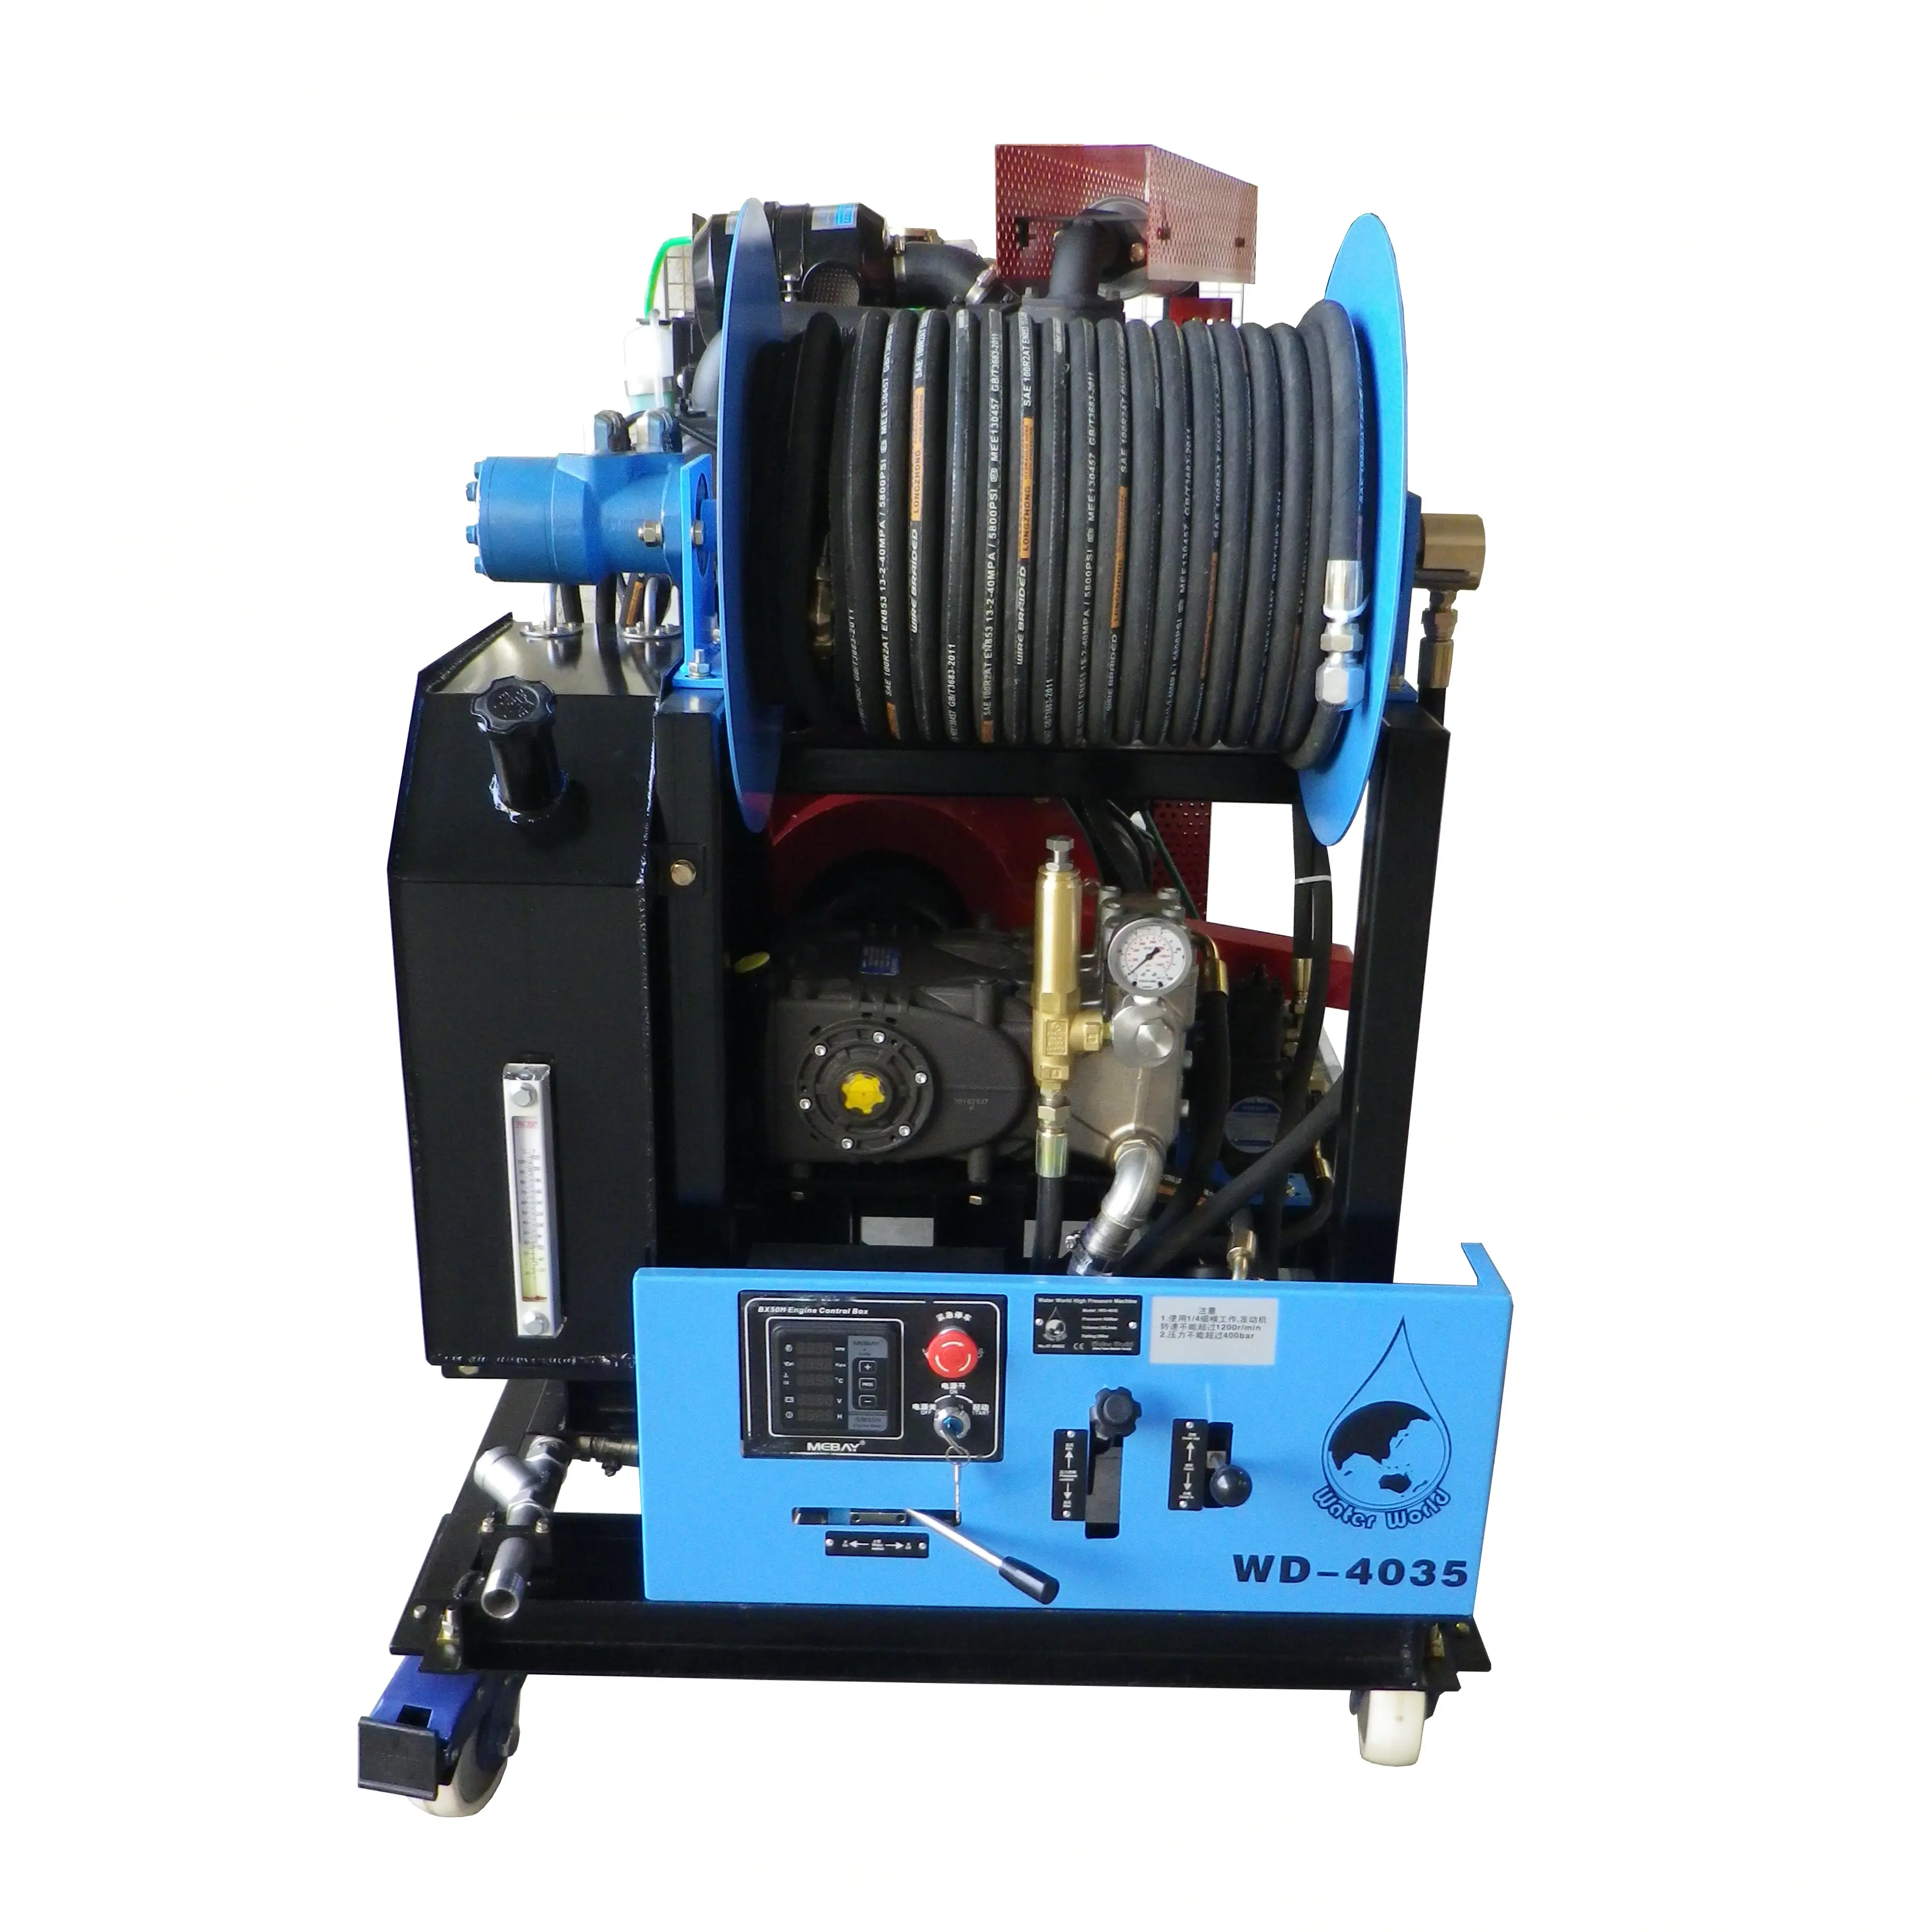 Electric Diesel Engine Drain Cleaning Machine 500 Bar Water Jet for Home Use Restaurant Plastic Construction Core PLC Components